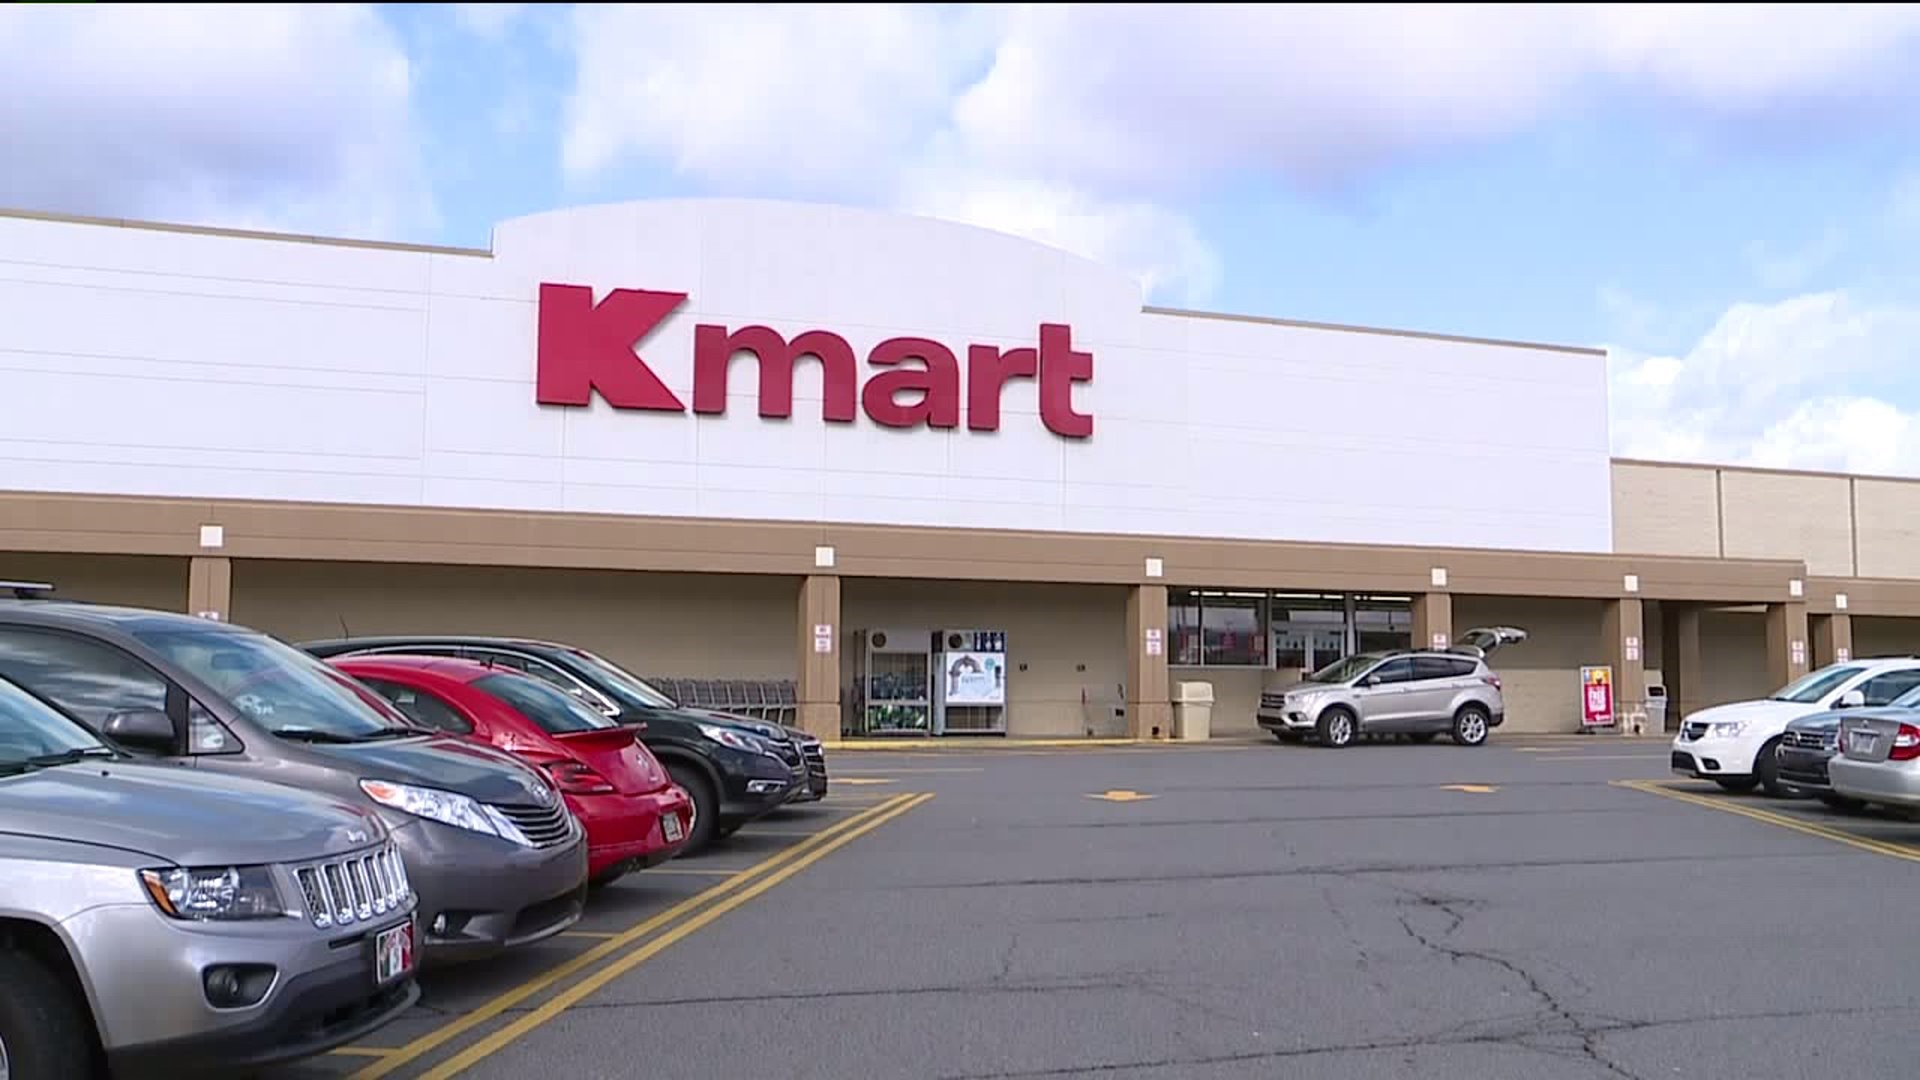 Local Kmart Stores Closing in February